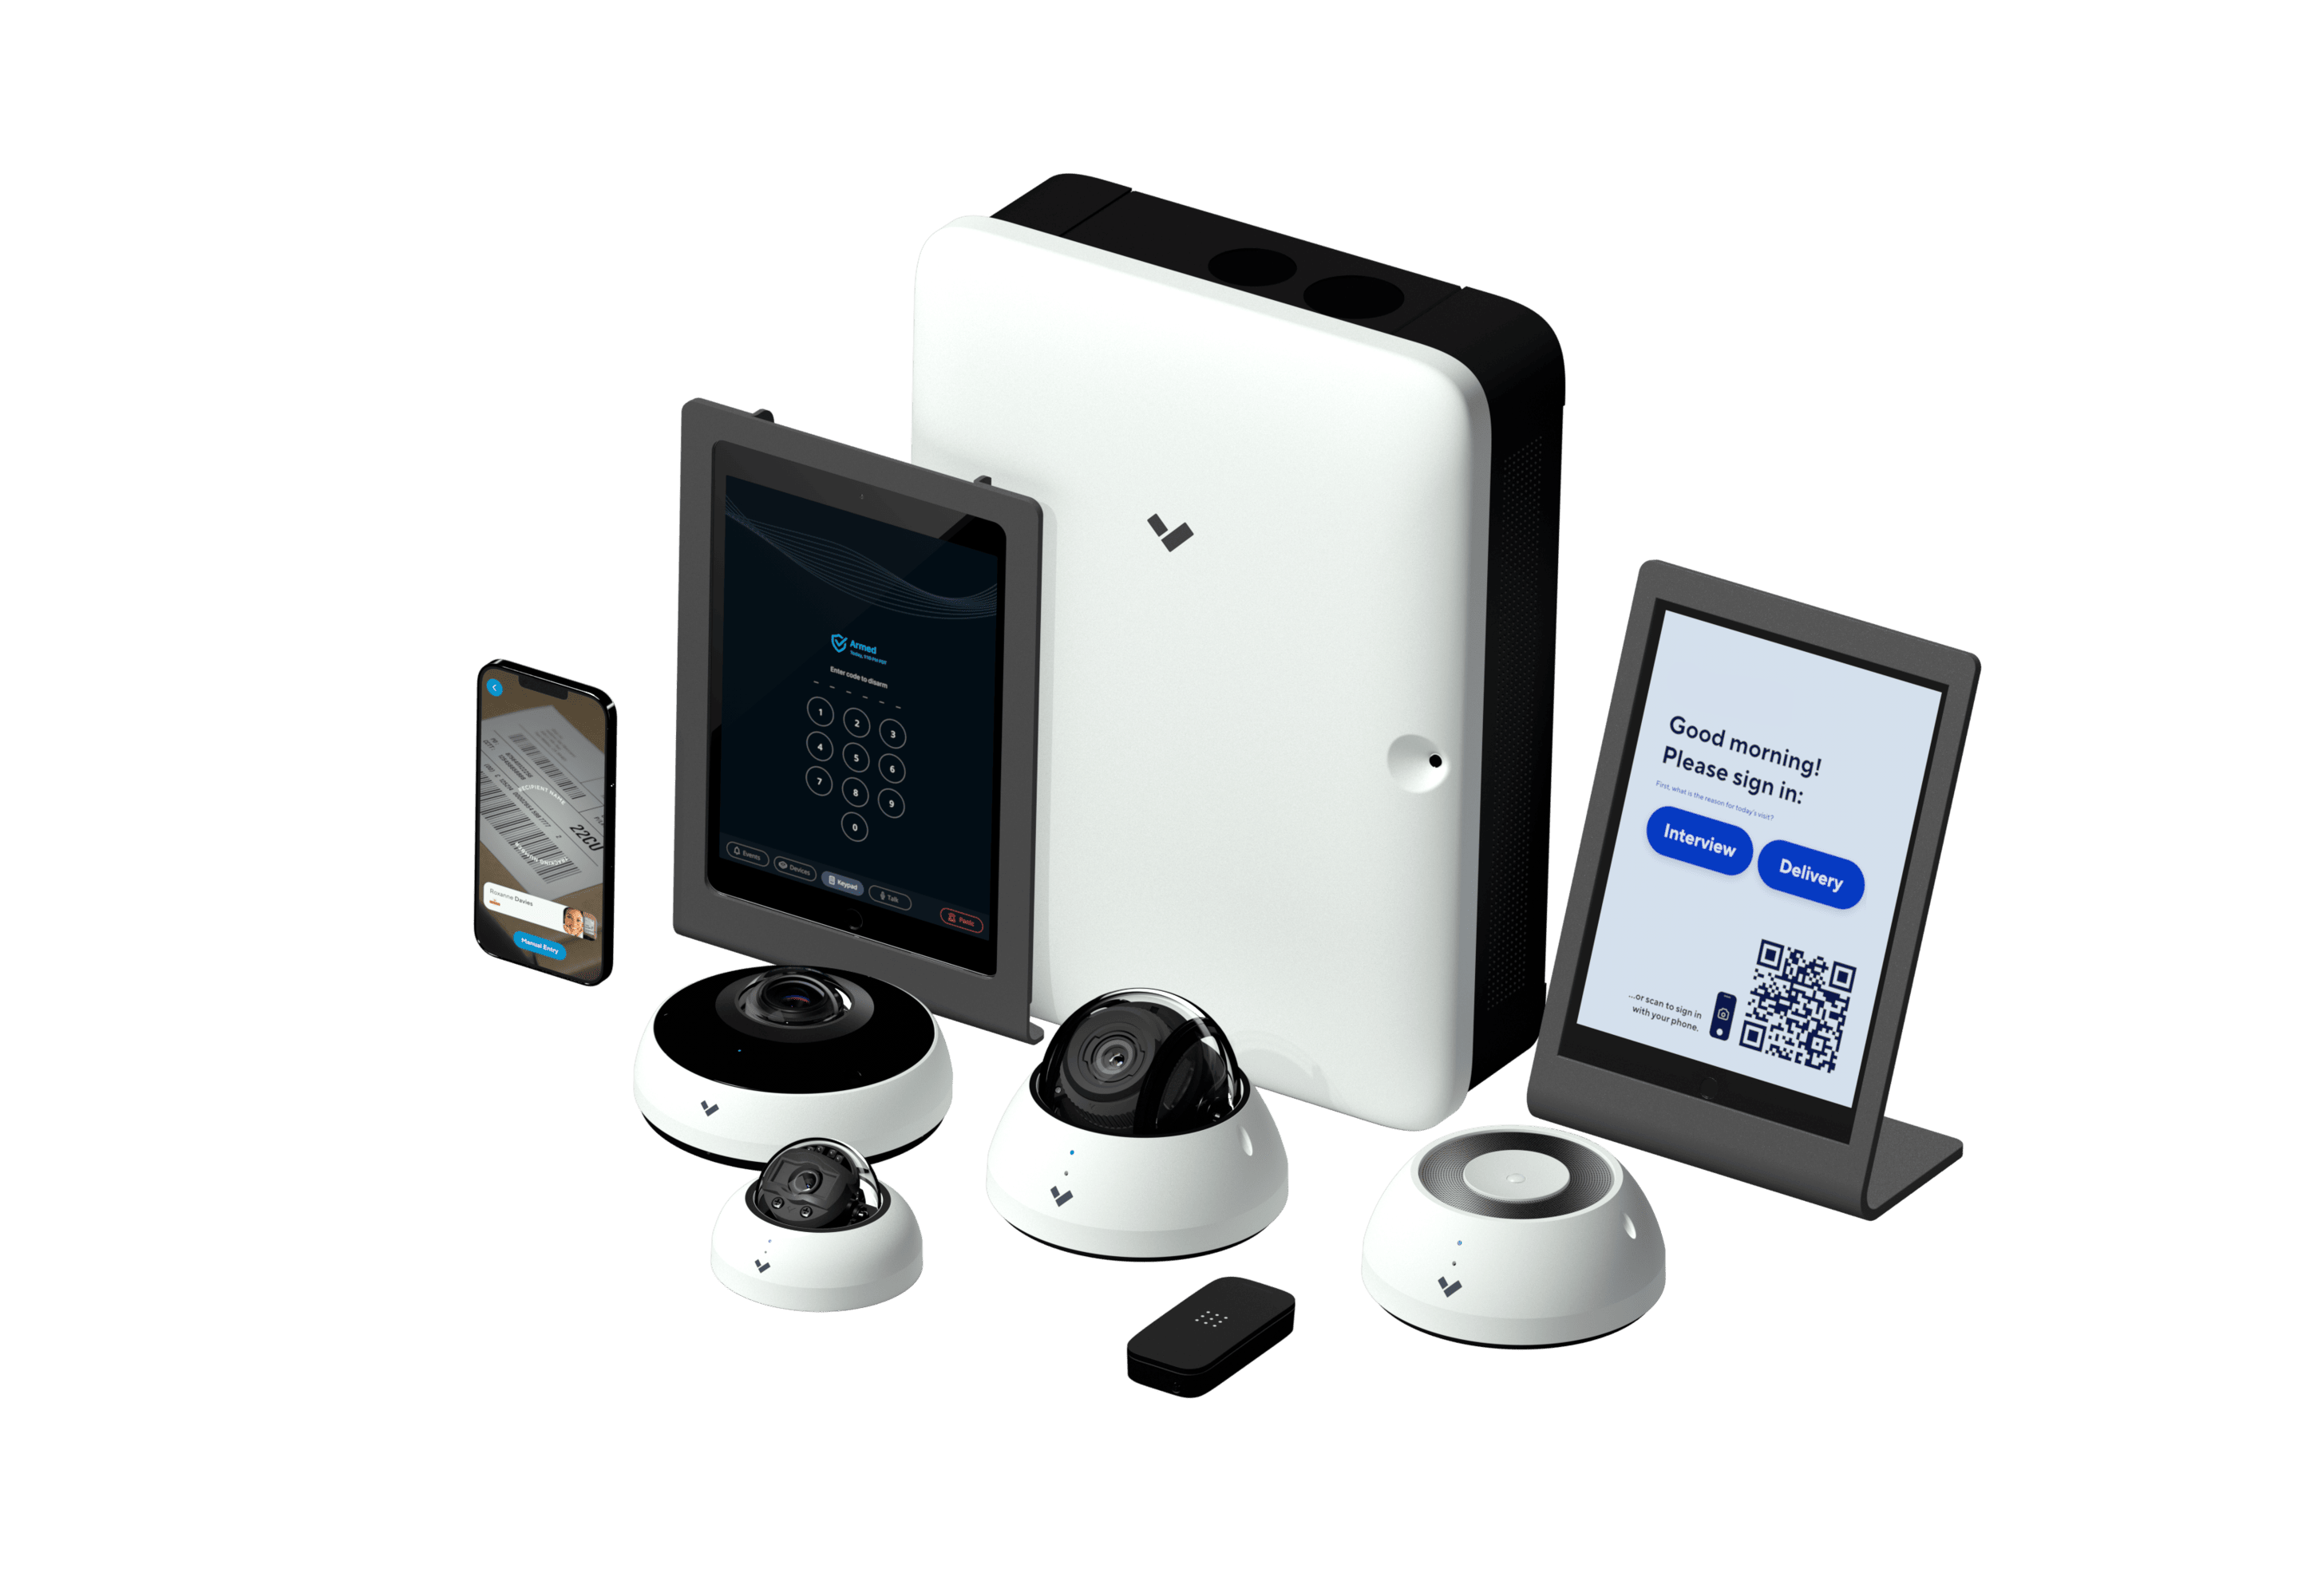 Verkada Device Family are all cloud security tools used for monitoring of hospitals, schools, manufacturing facilities, and other buildings